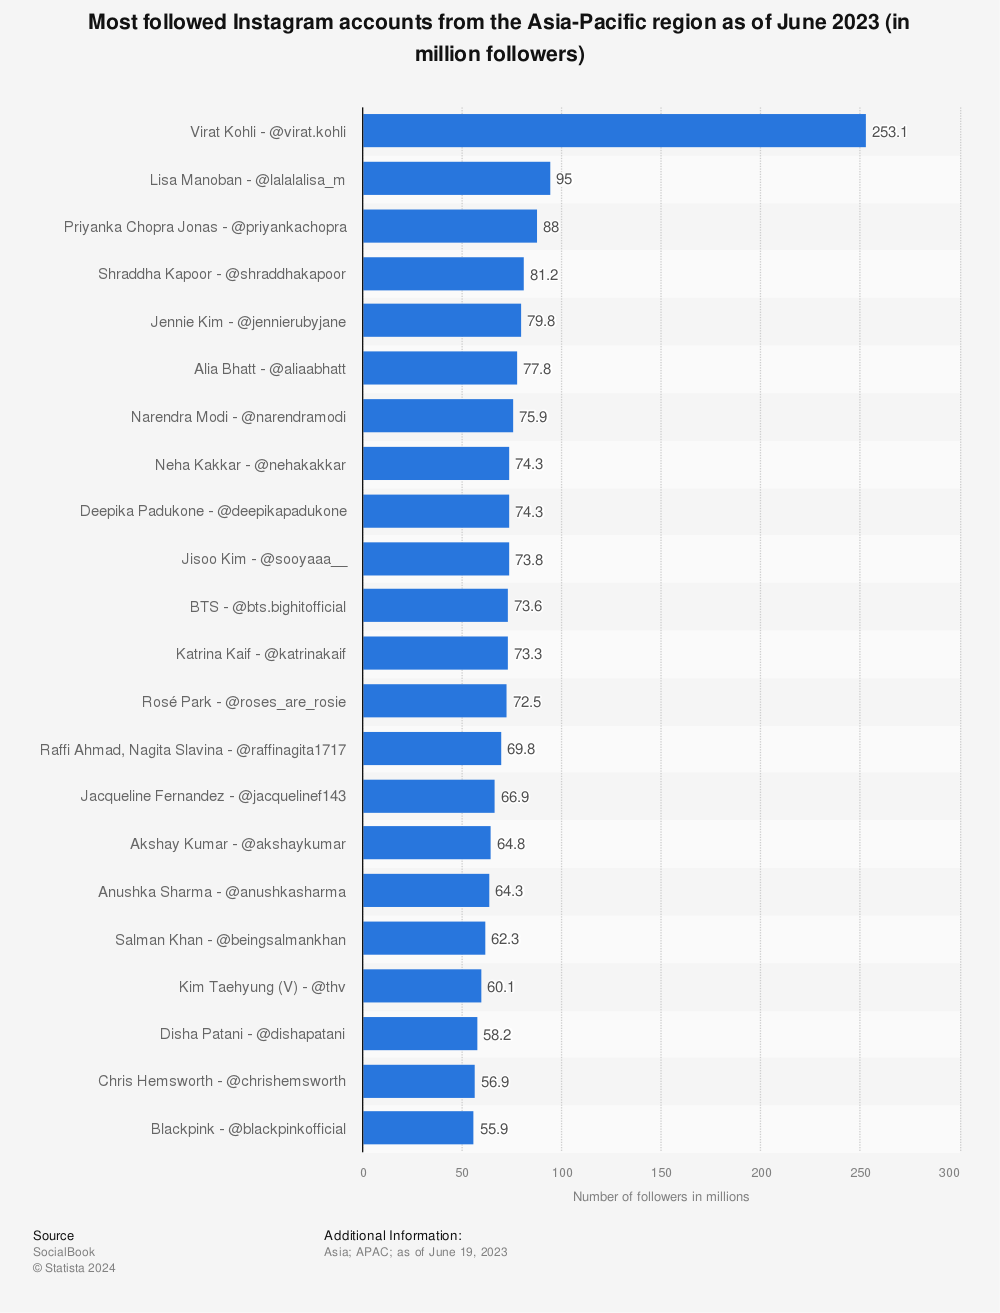 Statistic: Most followed Instagram accounts from the Asia-Pacific region as of June 2023 (in million followers) | Statista